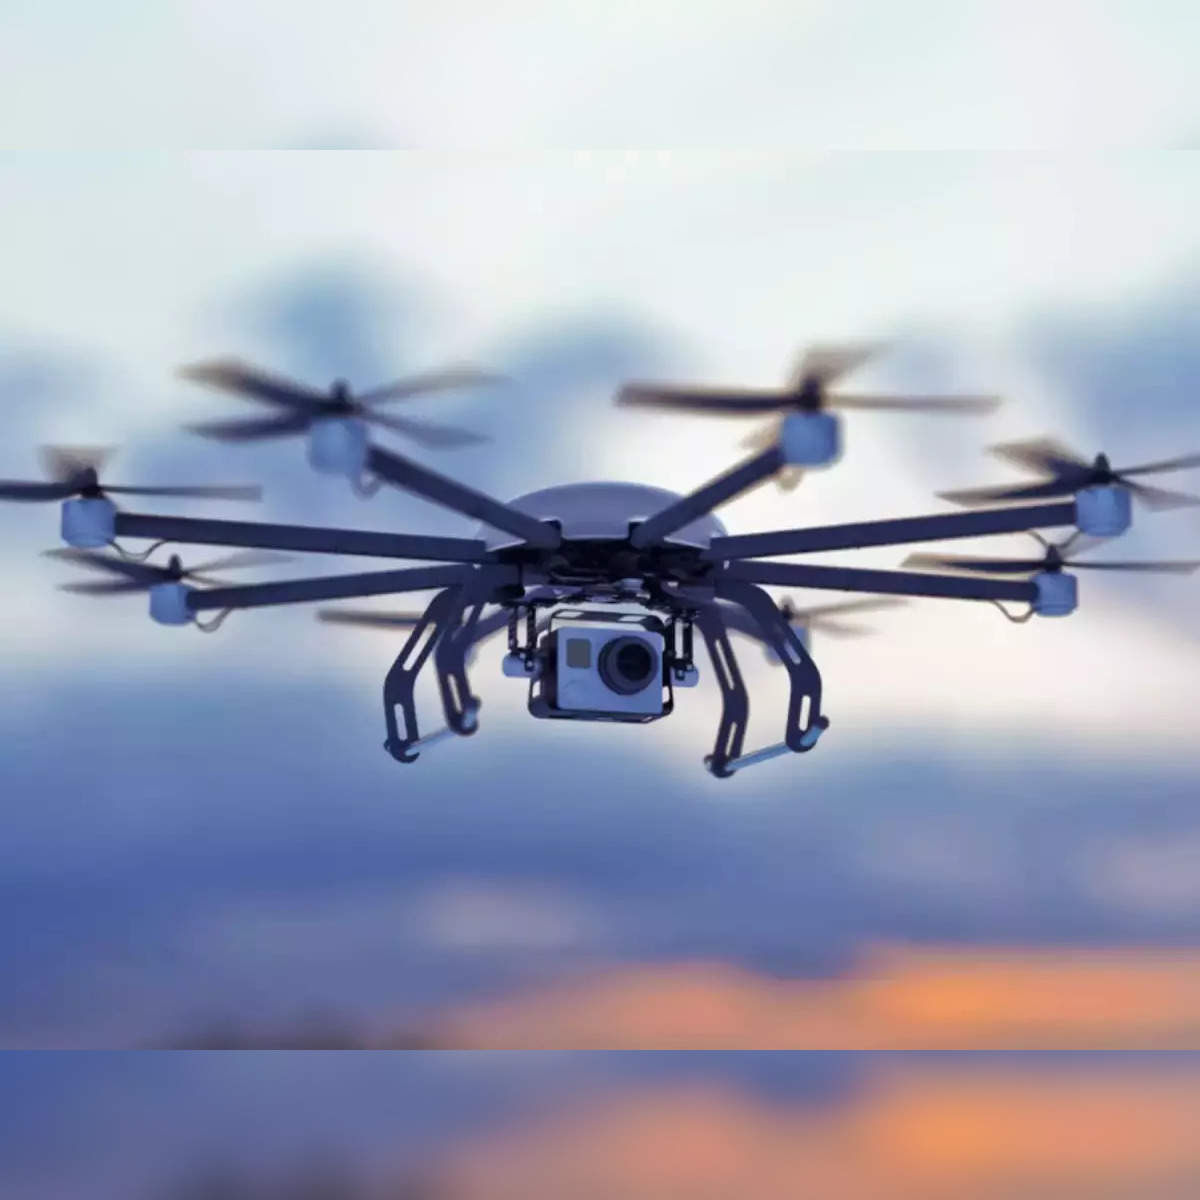 Govt amends export rules to enable Made in India drones to freely